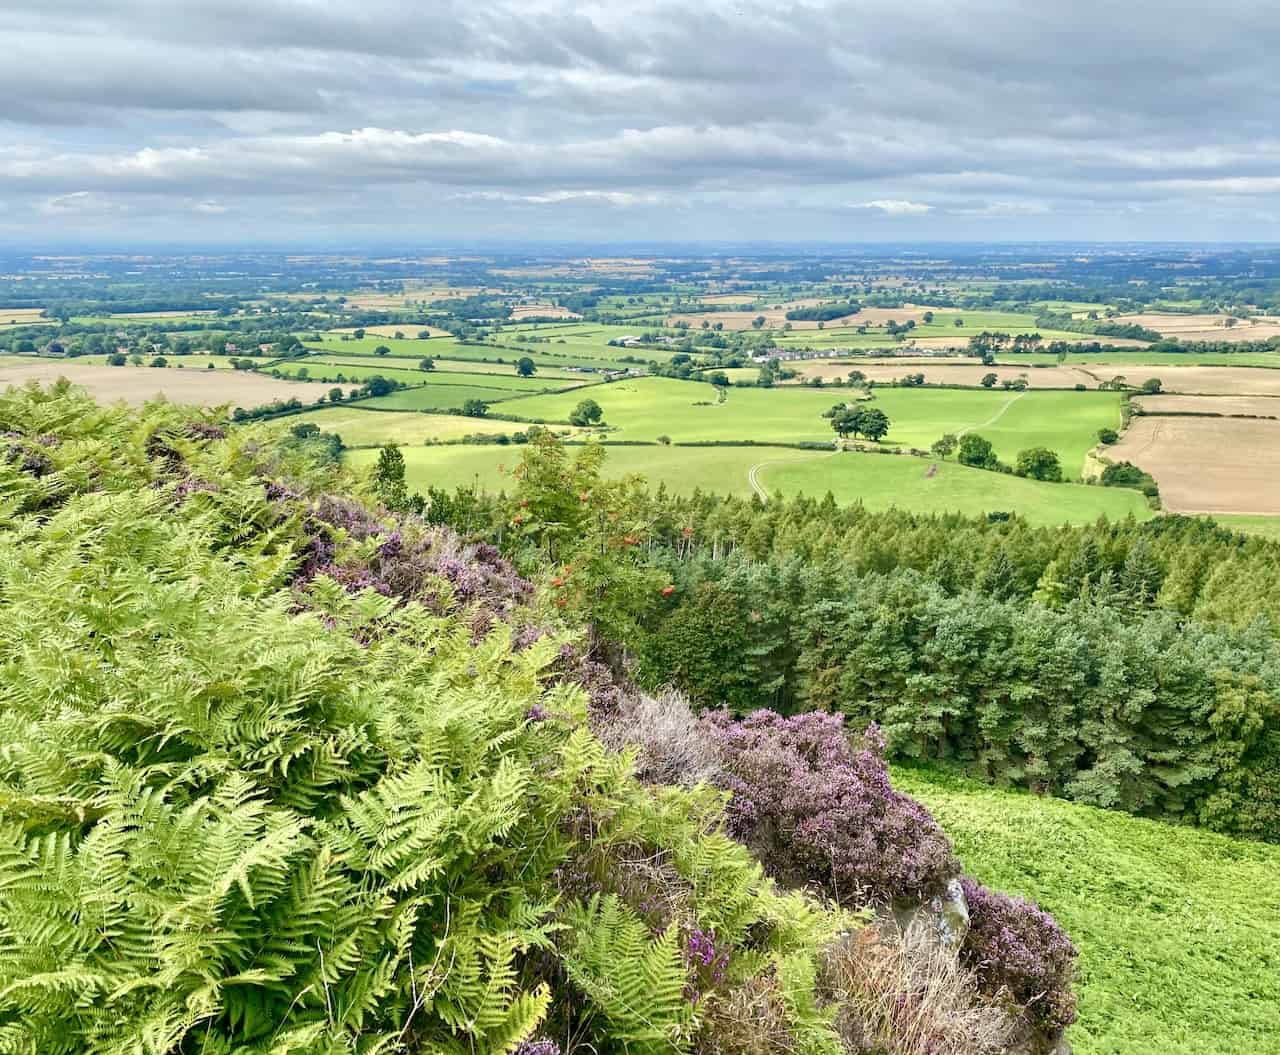 Amazing views from Ingleby Bank across North Yorkshire and the North York Moors. At Ingleby Bank we're about two-thirds of the way round our Urra Moor walk.